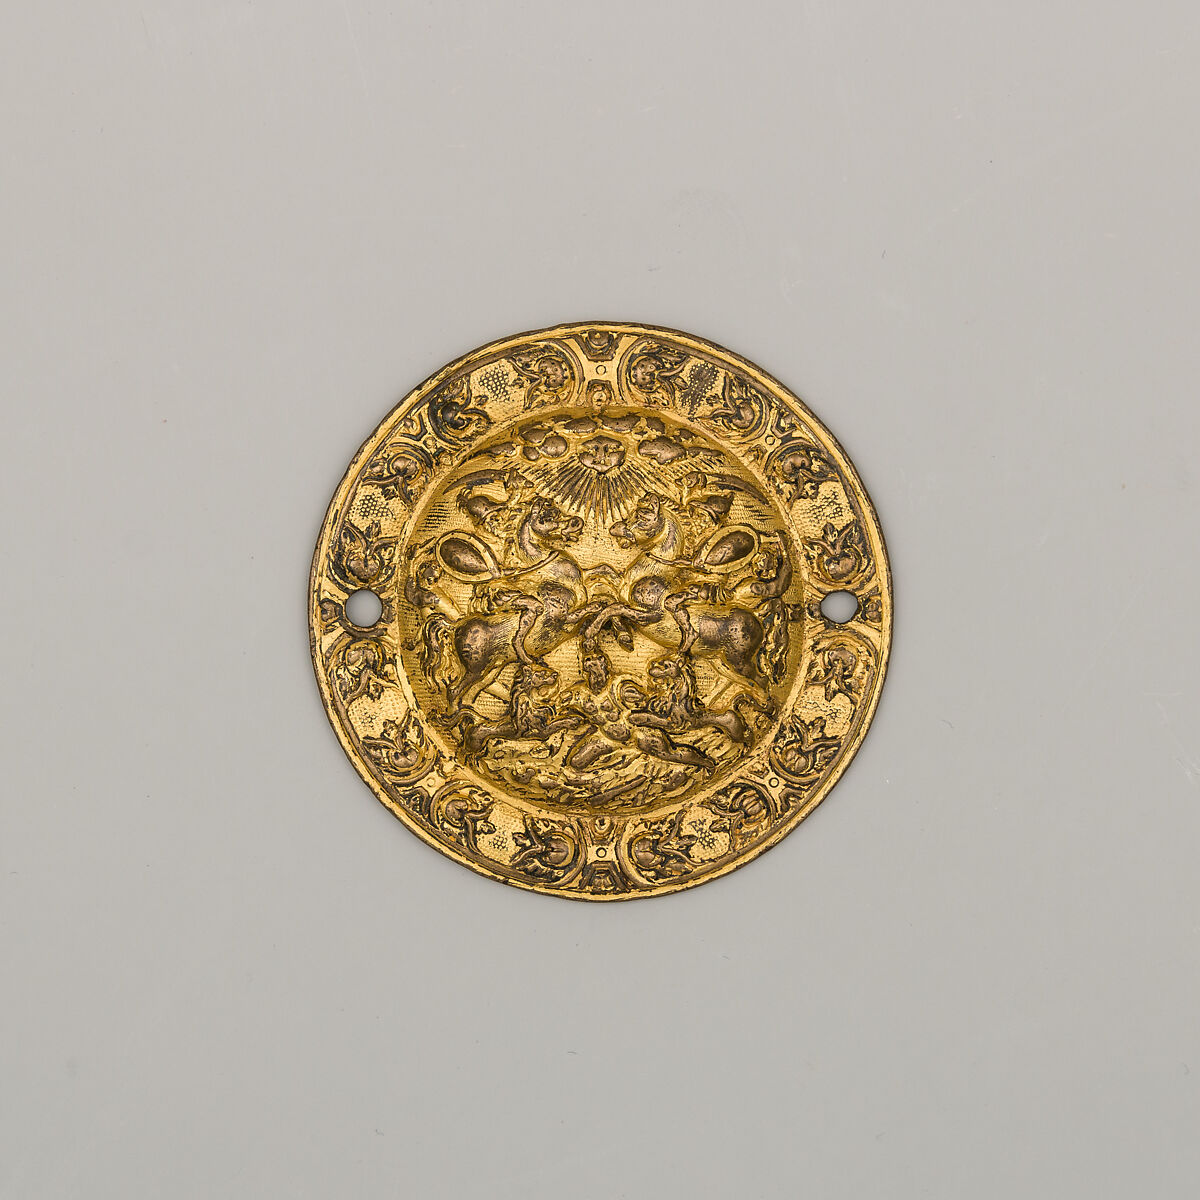 Bit Boss, Copper alloy, gold, German, probably Augsburg 